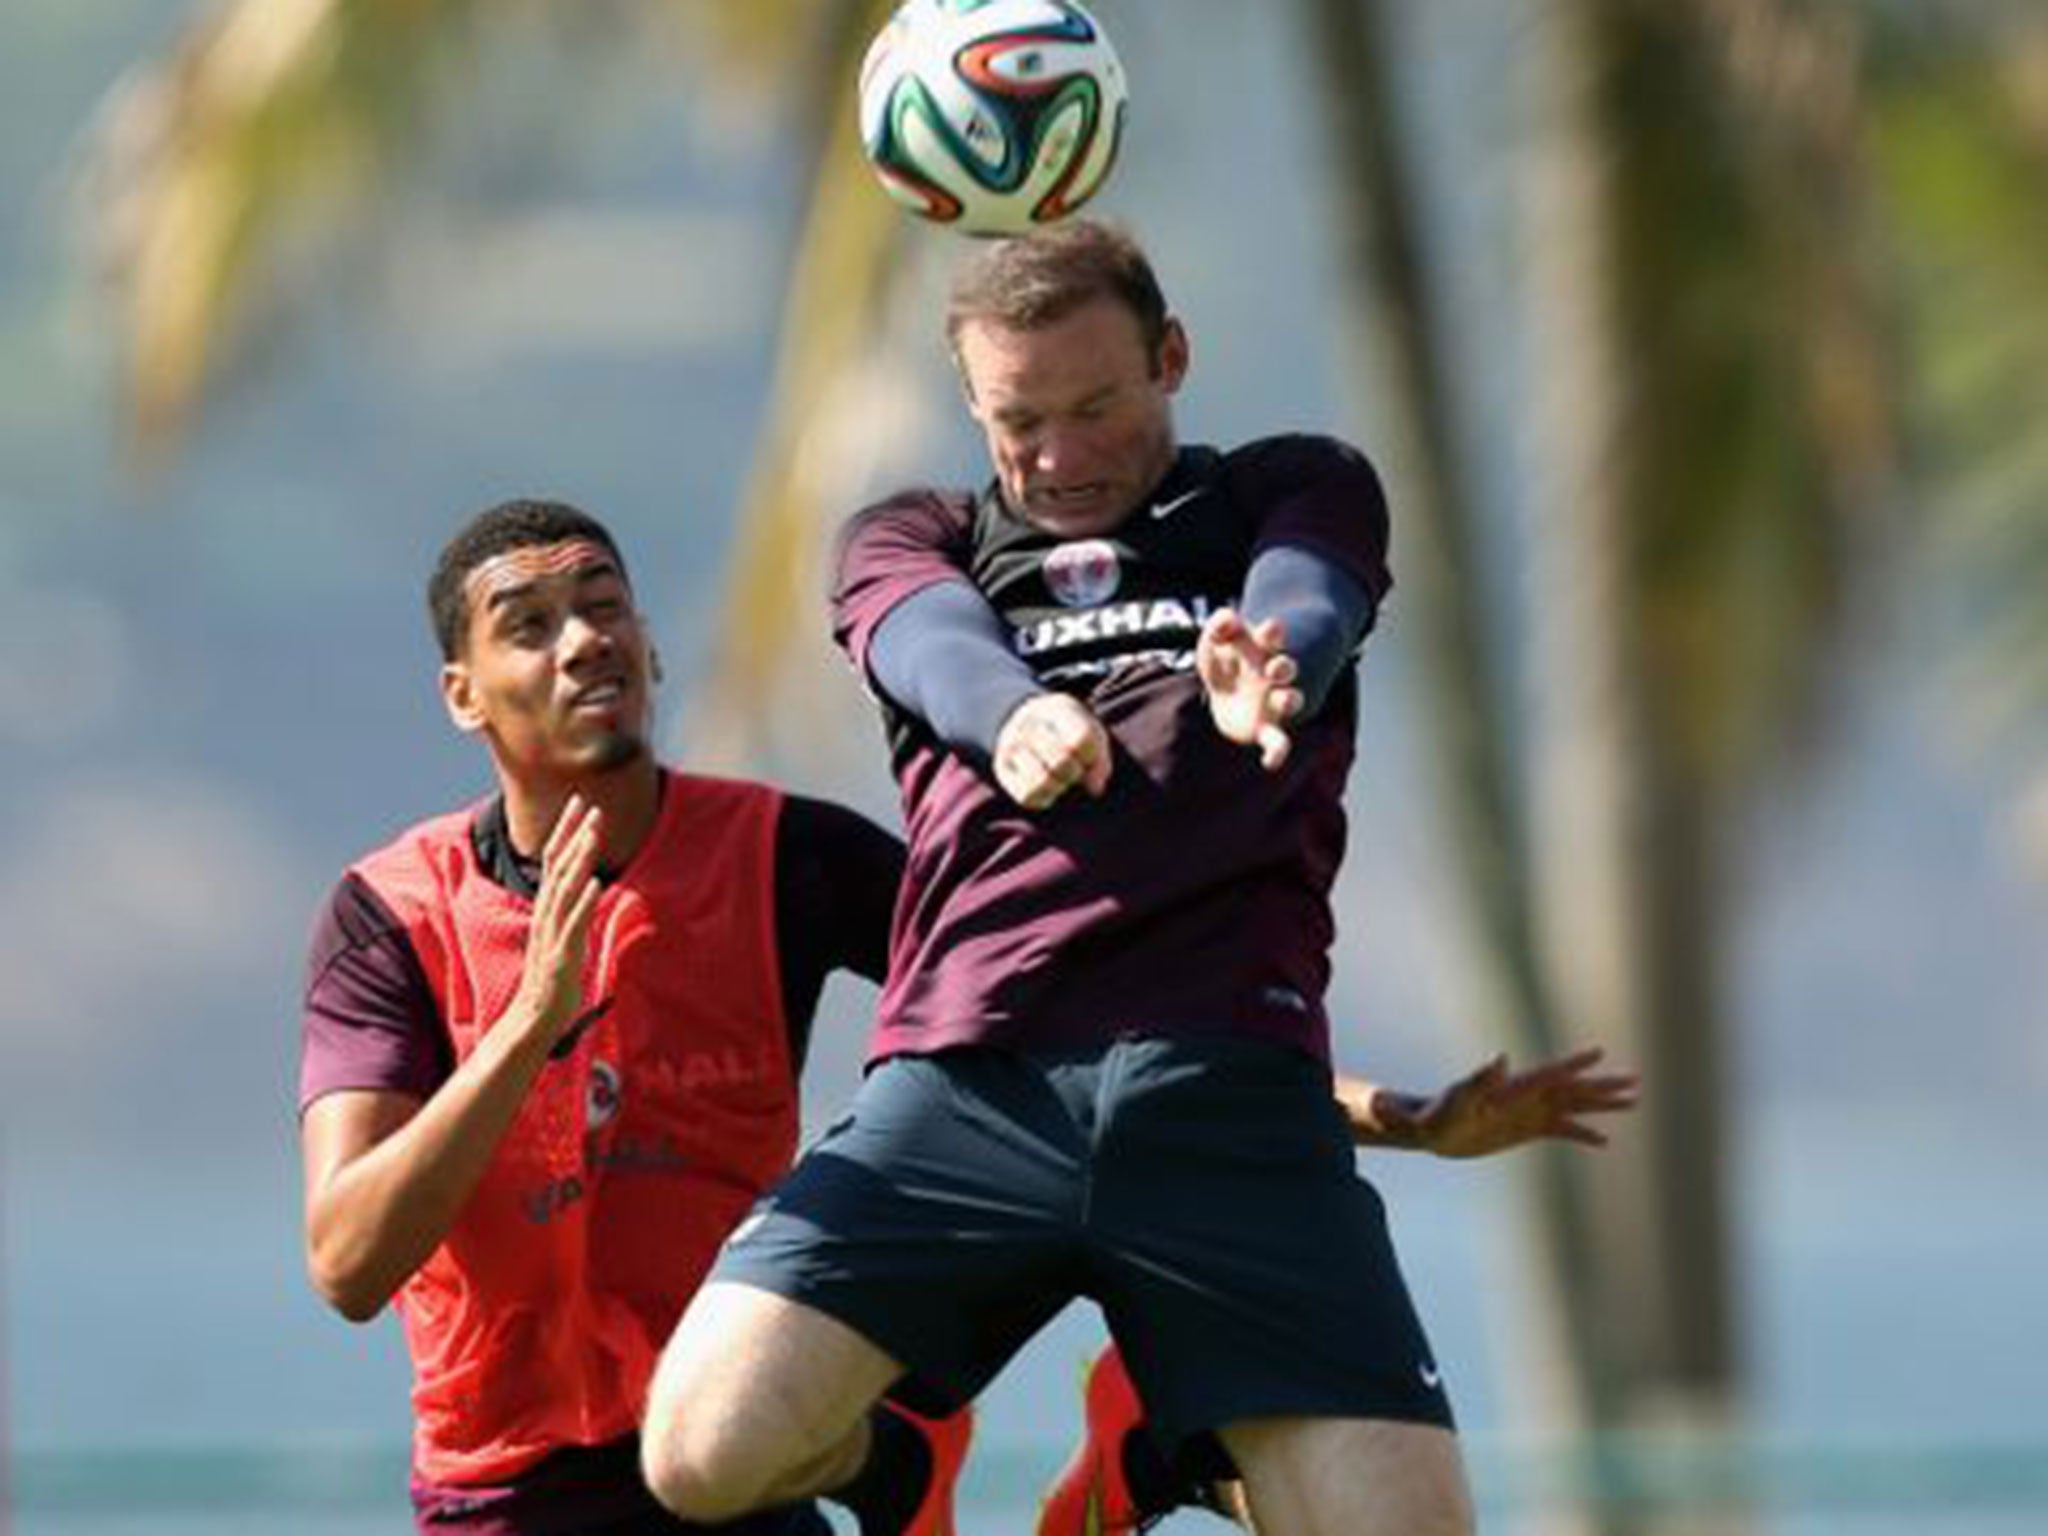 Wayne Rooney outjumps Chris Smalling during England training in Rio